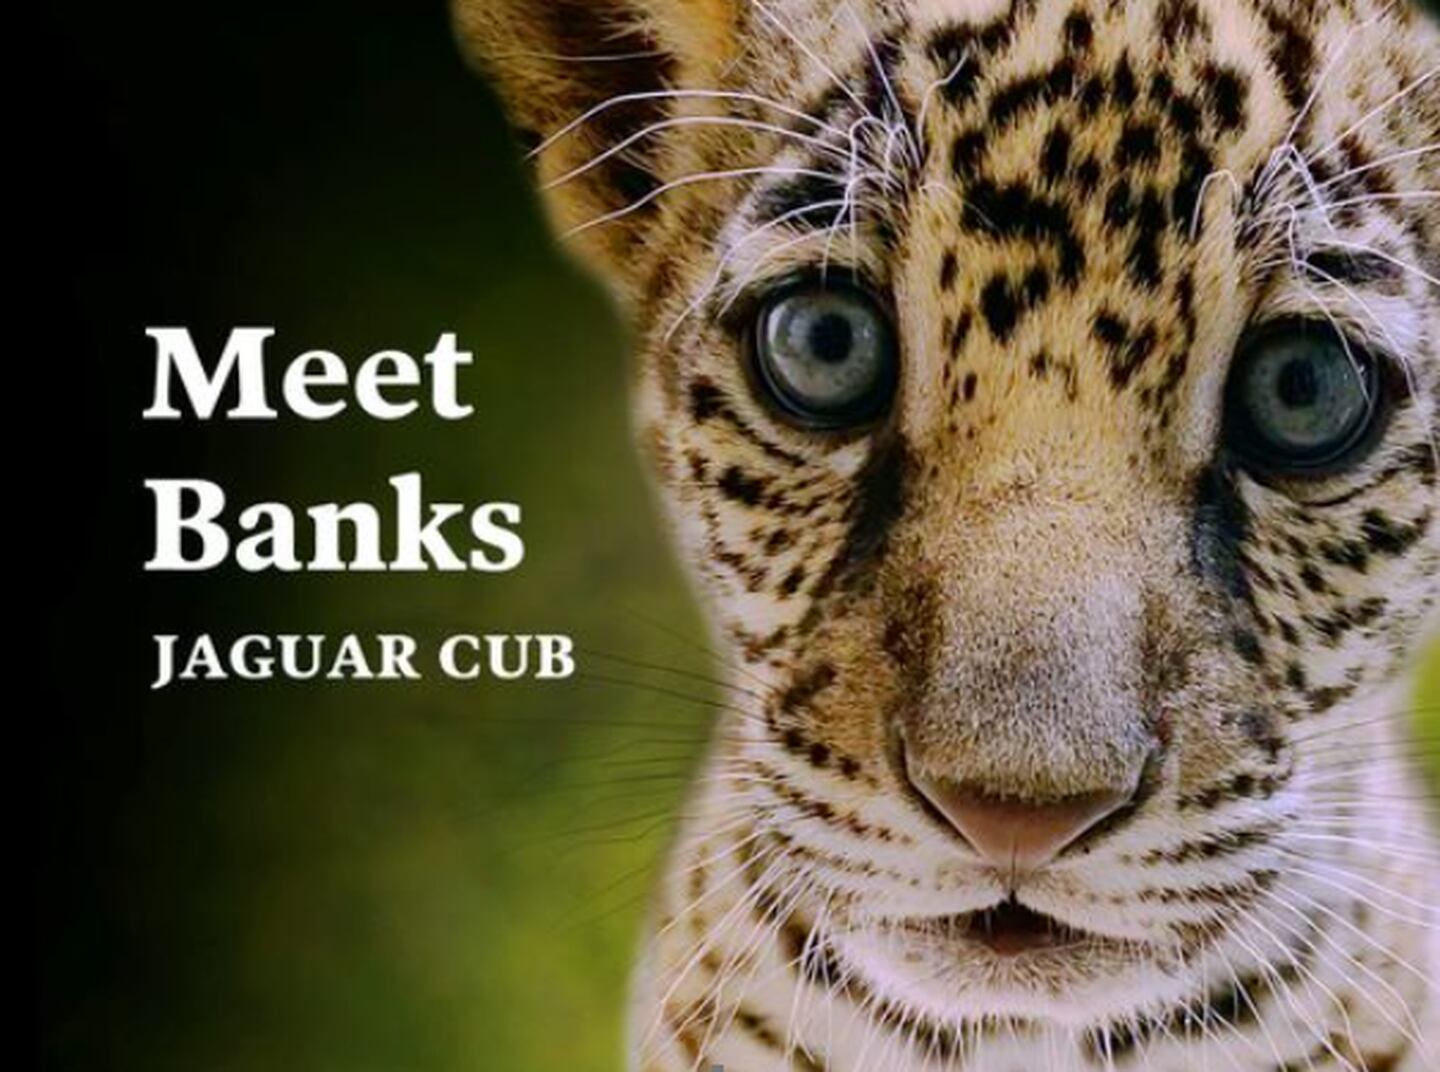 Jacksonville Zoo and Gardens has announced the name for their new jaguar cub.